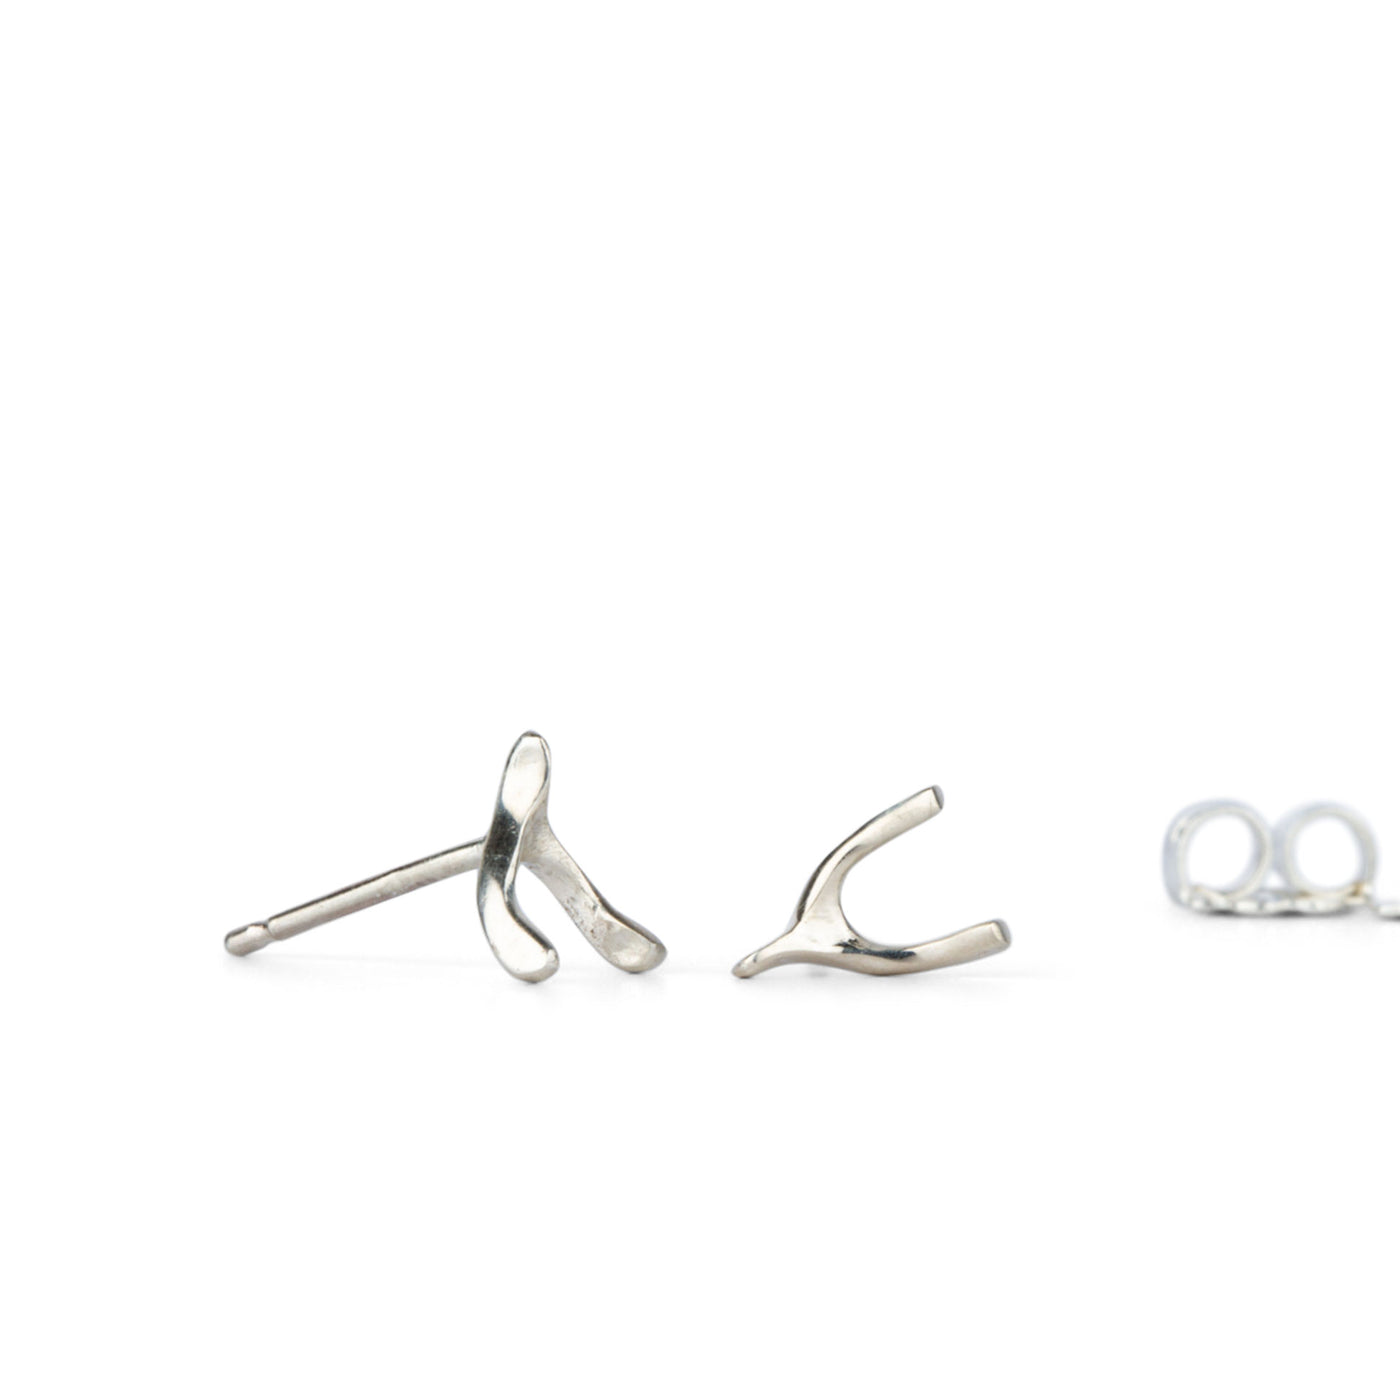 Silver Wishbone Stud Earrings by Corey Egan side view on a white background